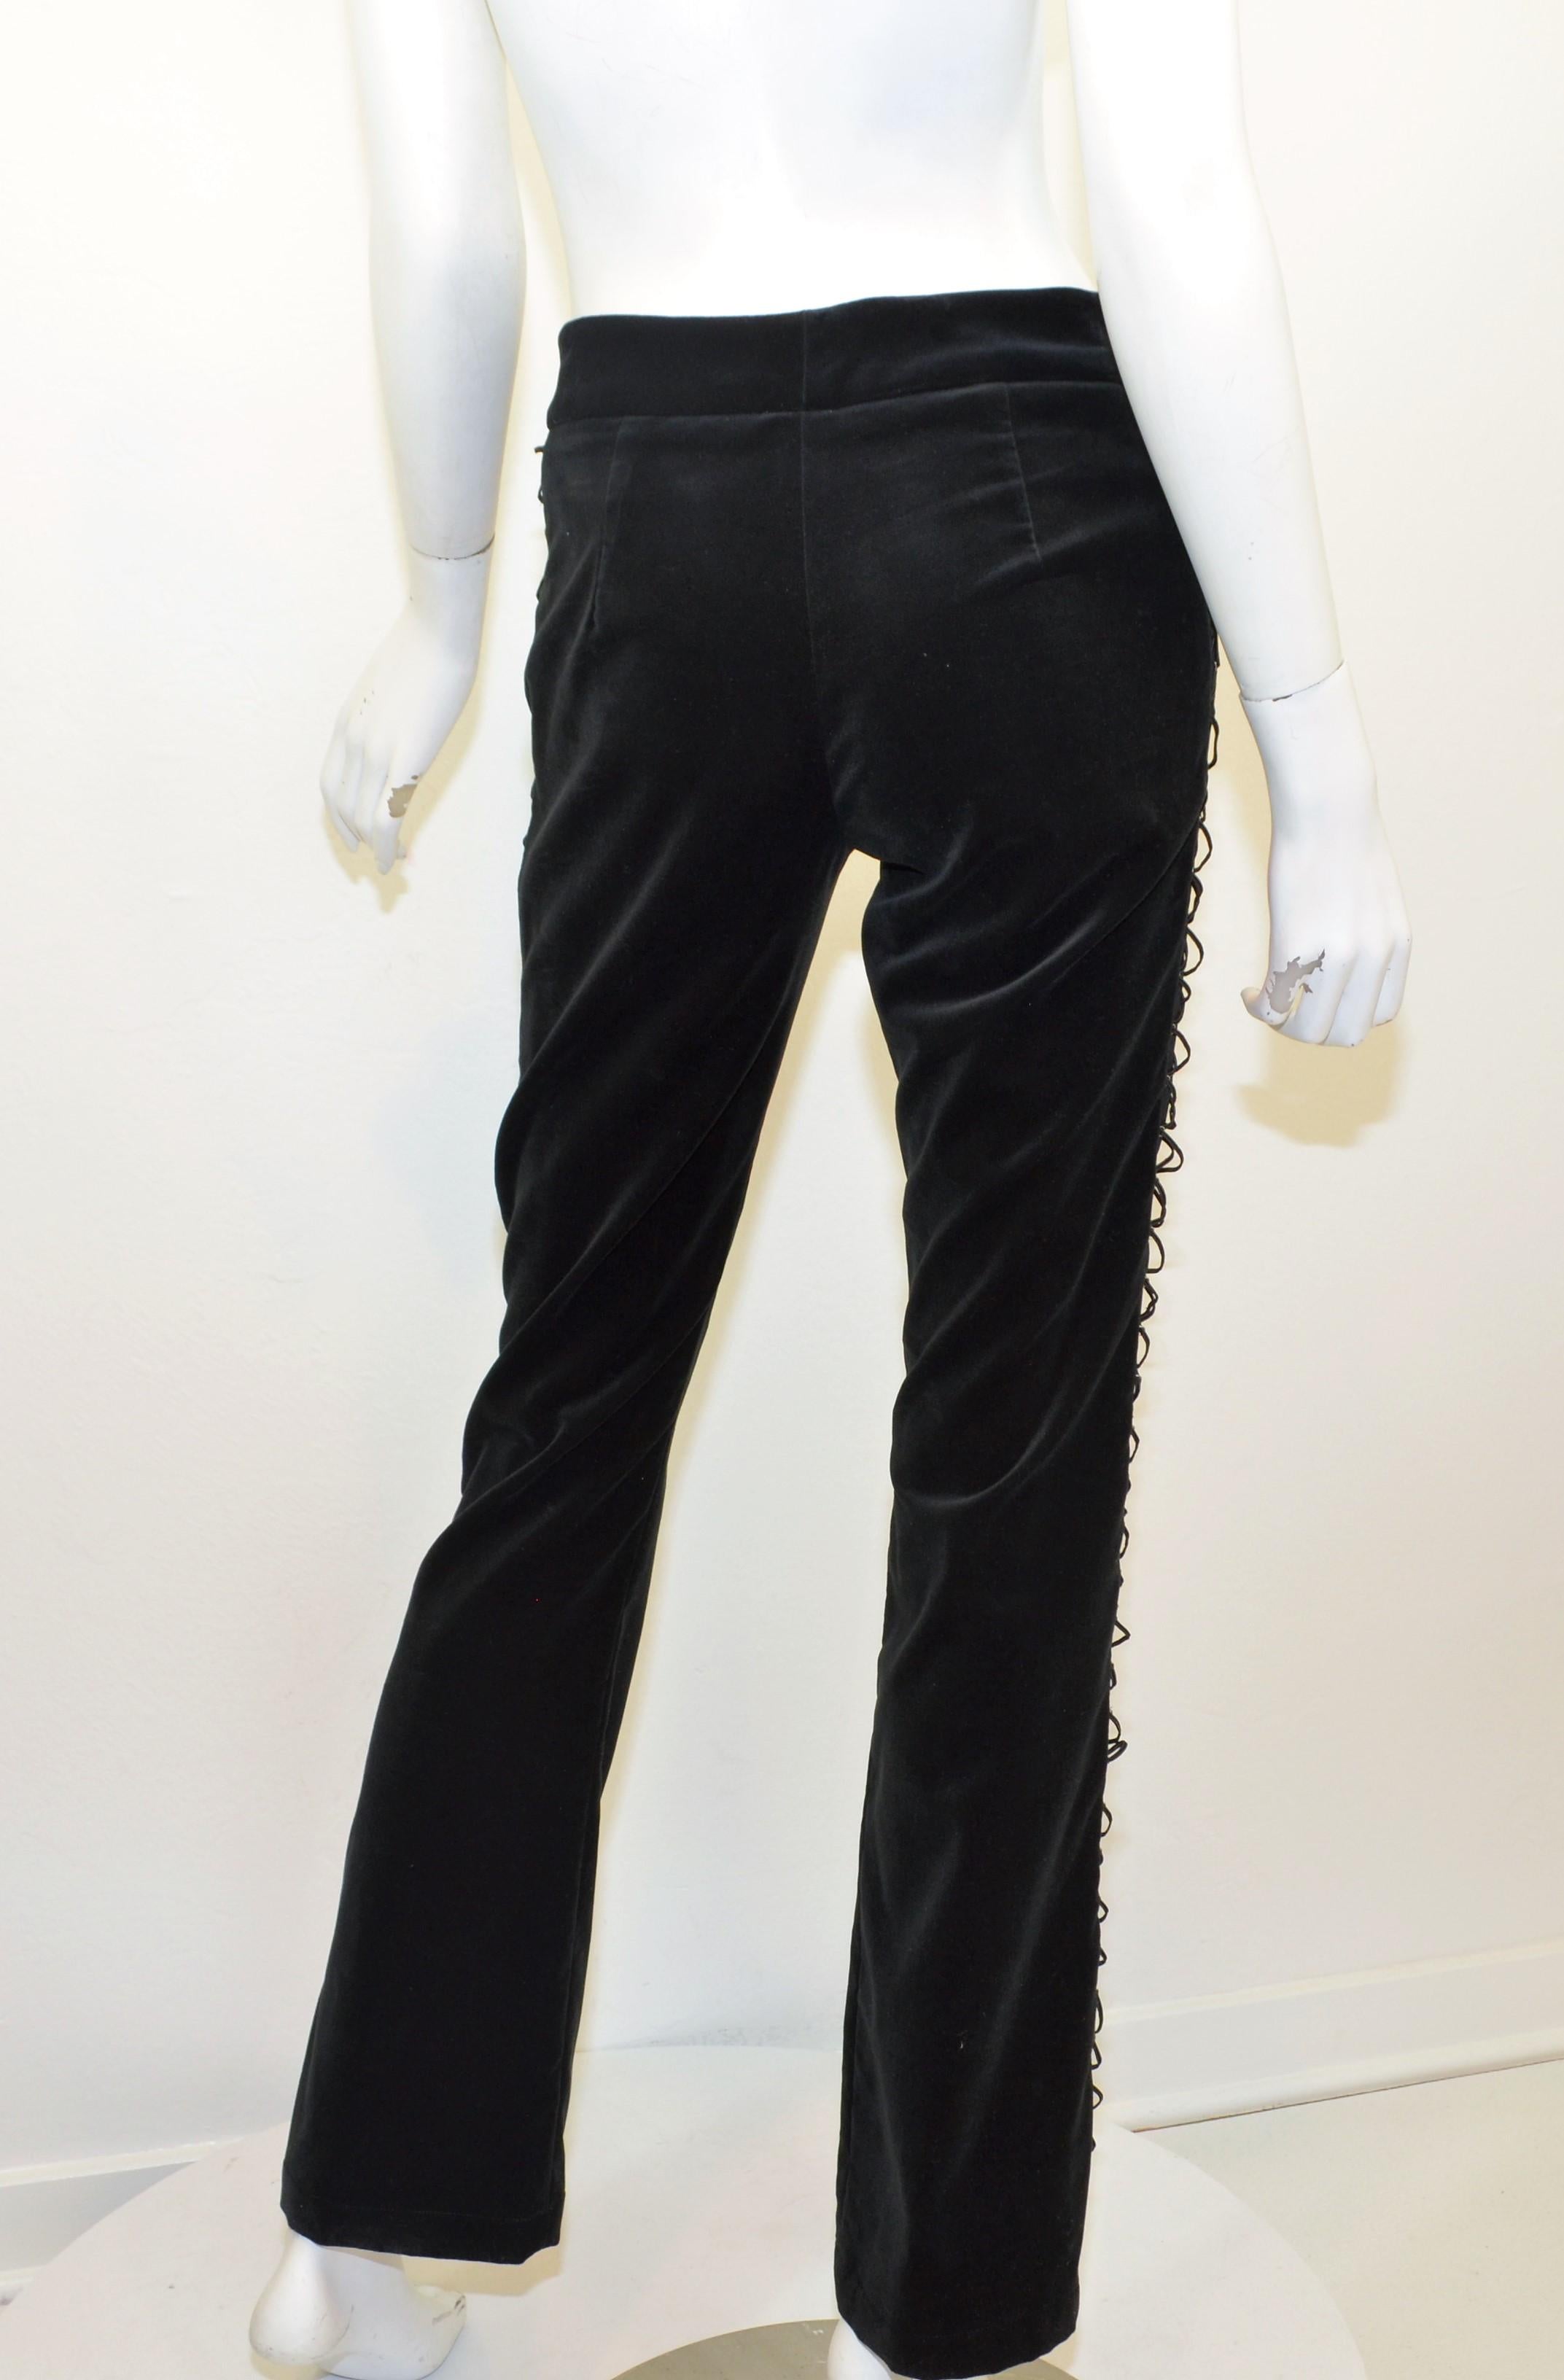 D & G pants are featured in black velvet with lace-up detailing along the satin side panels, zip and hook fastening, and two uncut slip pockets at the front. Pants are in great pre-owned condition with minimal wear and no flaws to